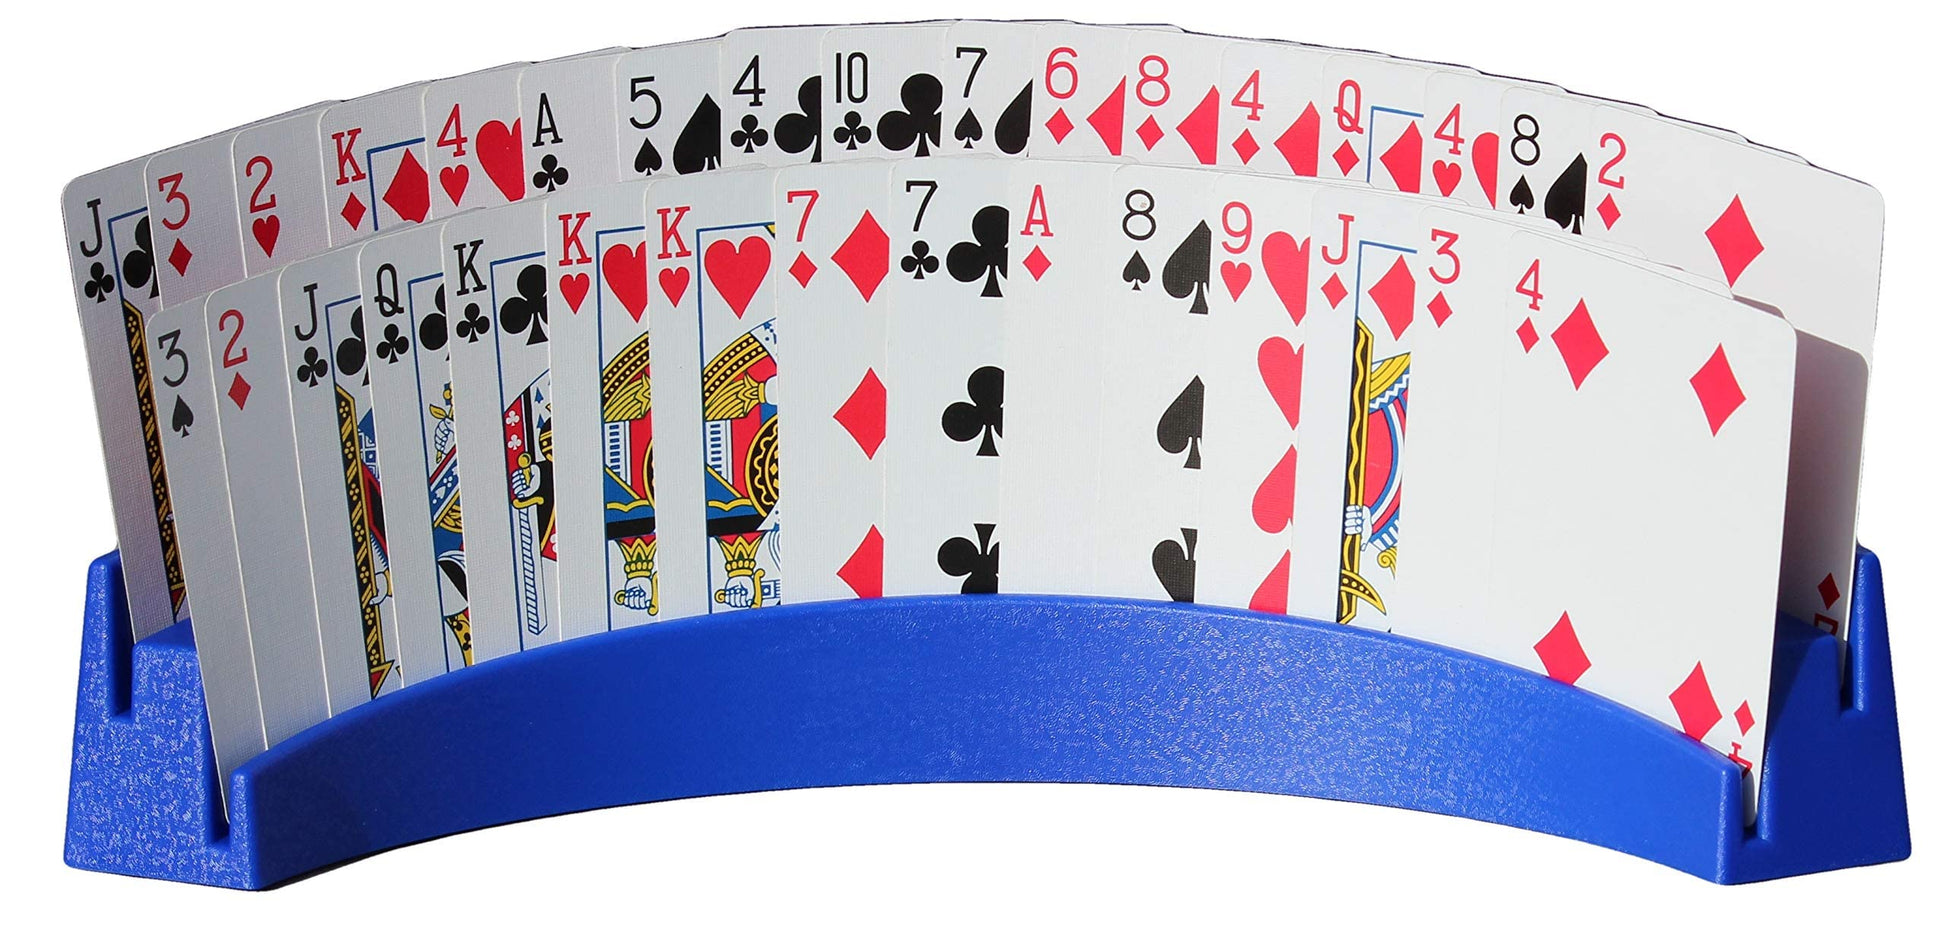 Twin Tier Premier Playing Card Holder (Set of 2) - Holds Up to 32 Playing Cards Easily - 12 1/2" x 4 1/2" x 2 1/4" - Stack for Storage - Made in The USA (Blue) - Opticdeals